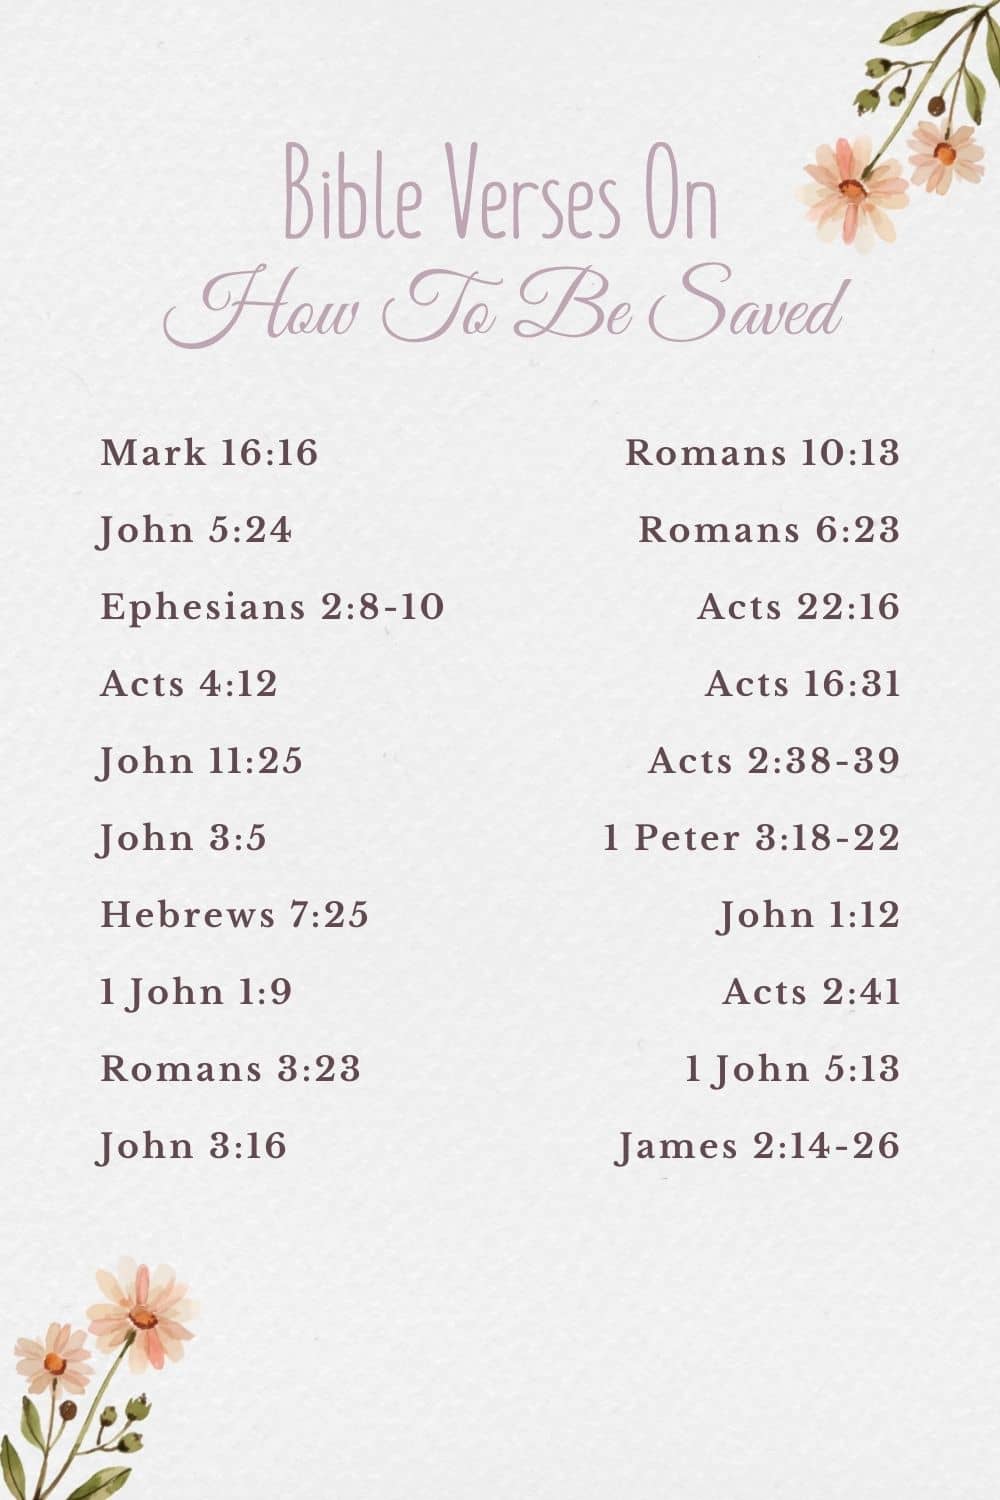 bible verses on how to be saved
how to be saved according to the bible
what must I do to be saved